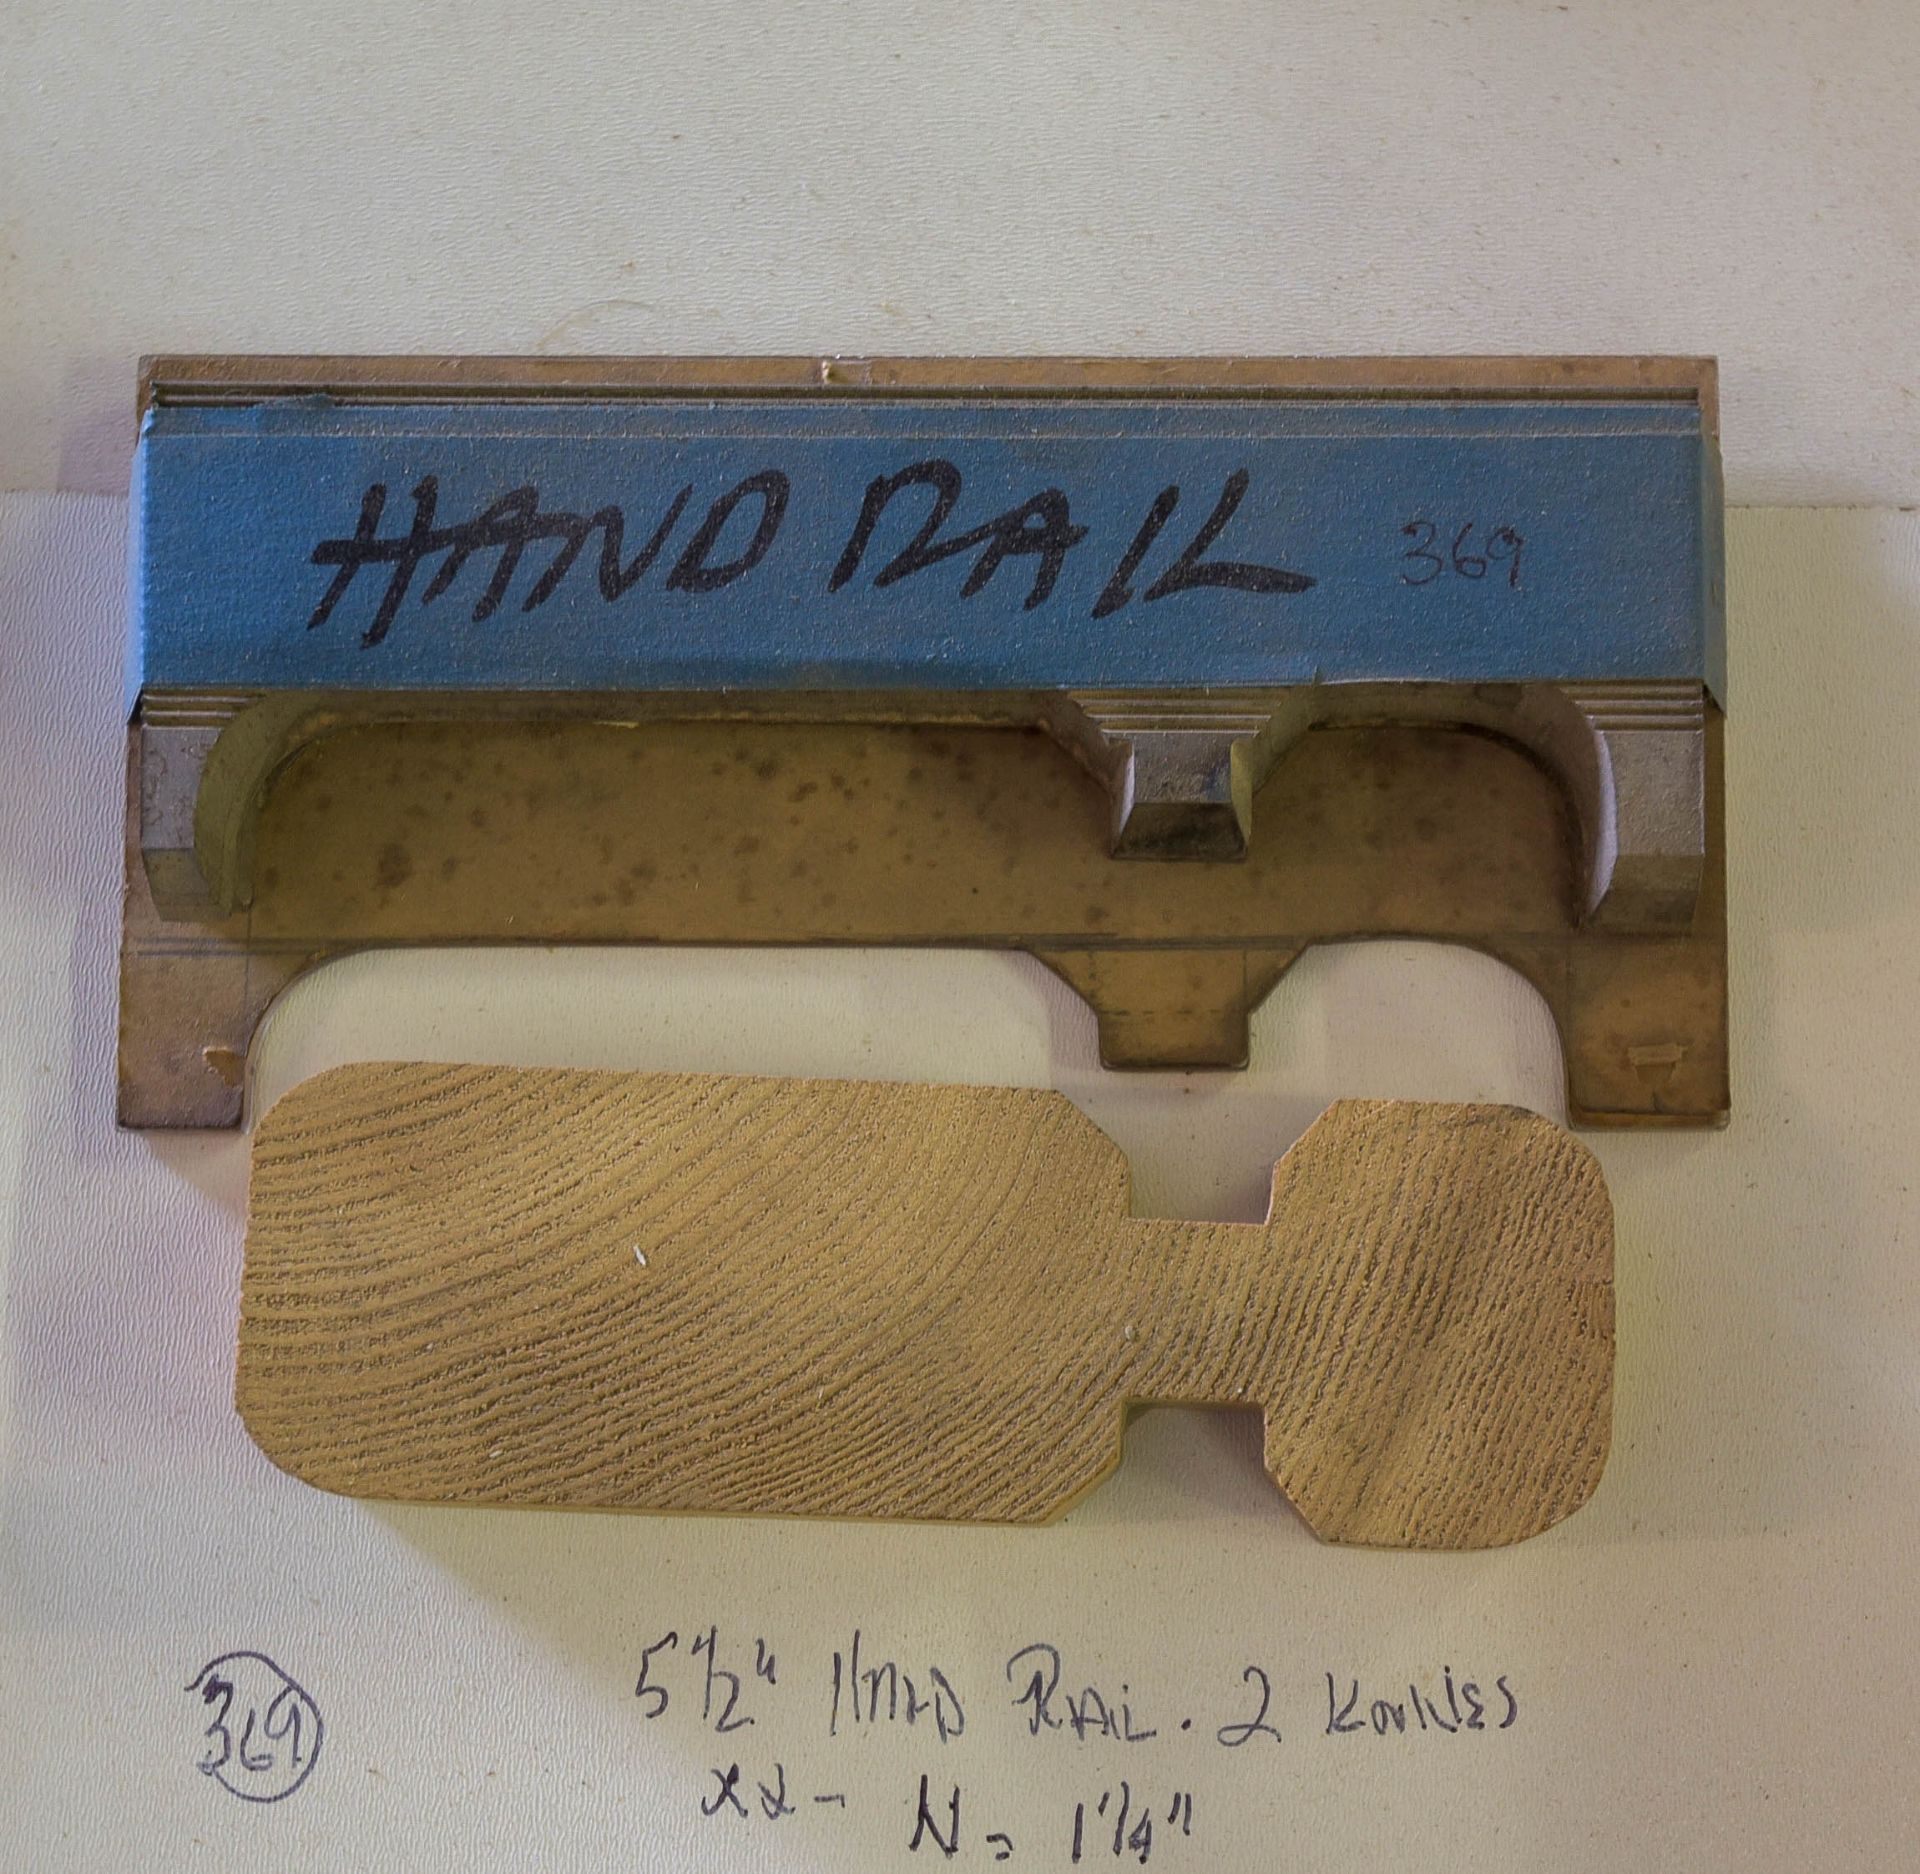 Moulding Knives, 5-1/2" Hand Rail, 2 Knives, N = 1-1/4", Dull, Knives are in Good Condition a